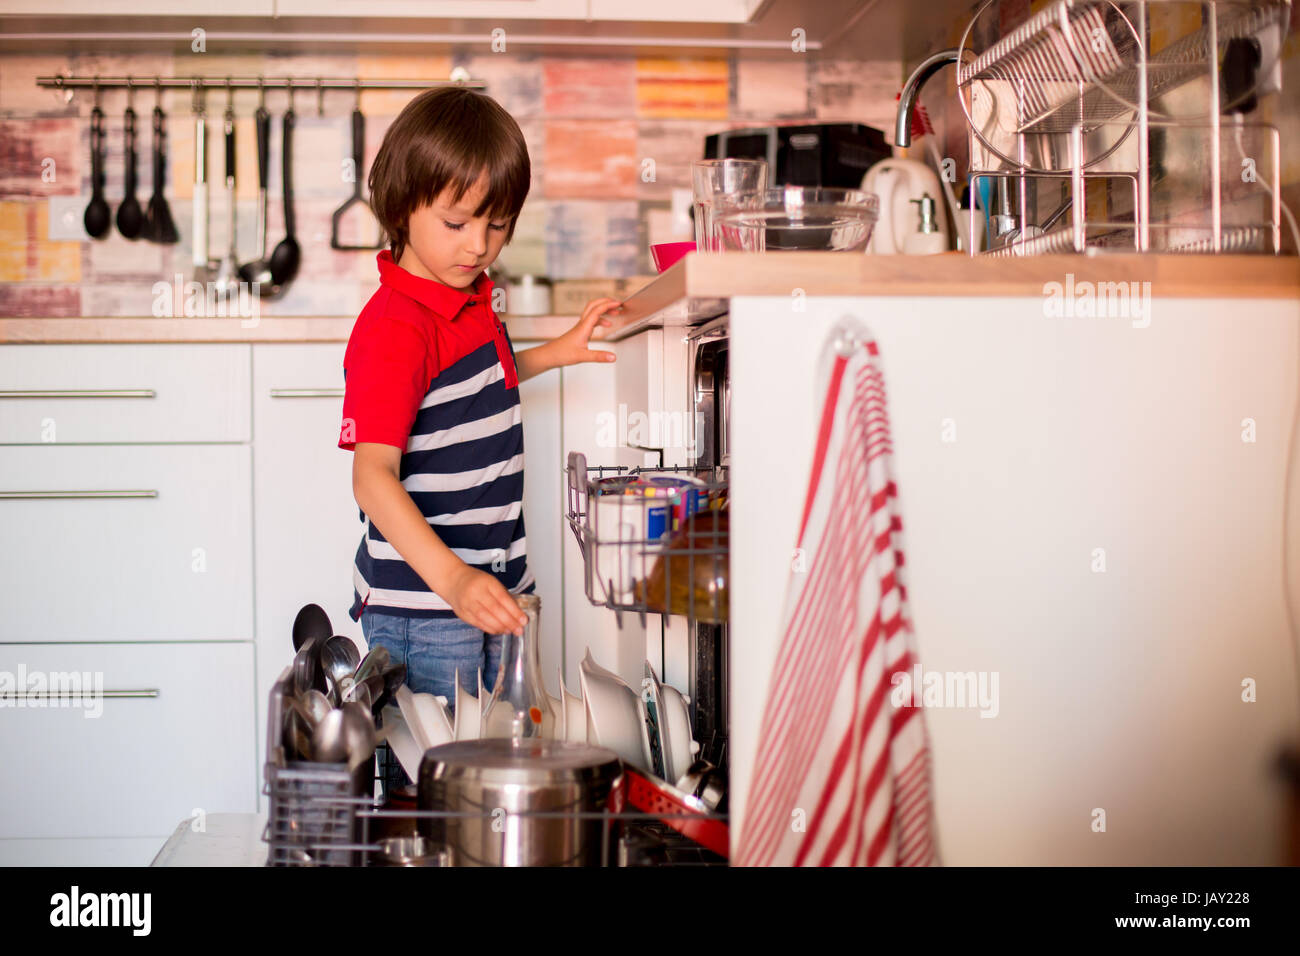 Preschool child, boy, helping mom, putting dirty dishes in dishwasher at home, modern kitchen Stock Photo